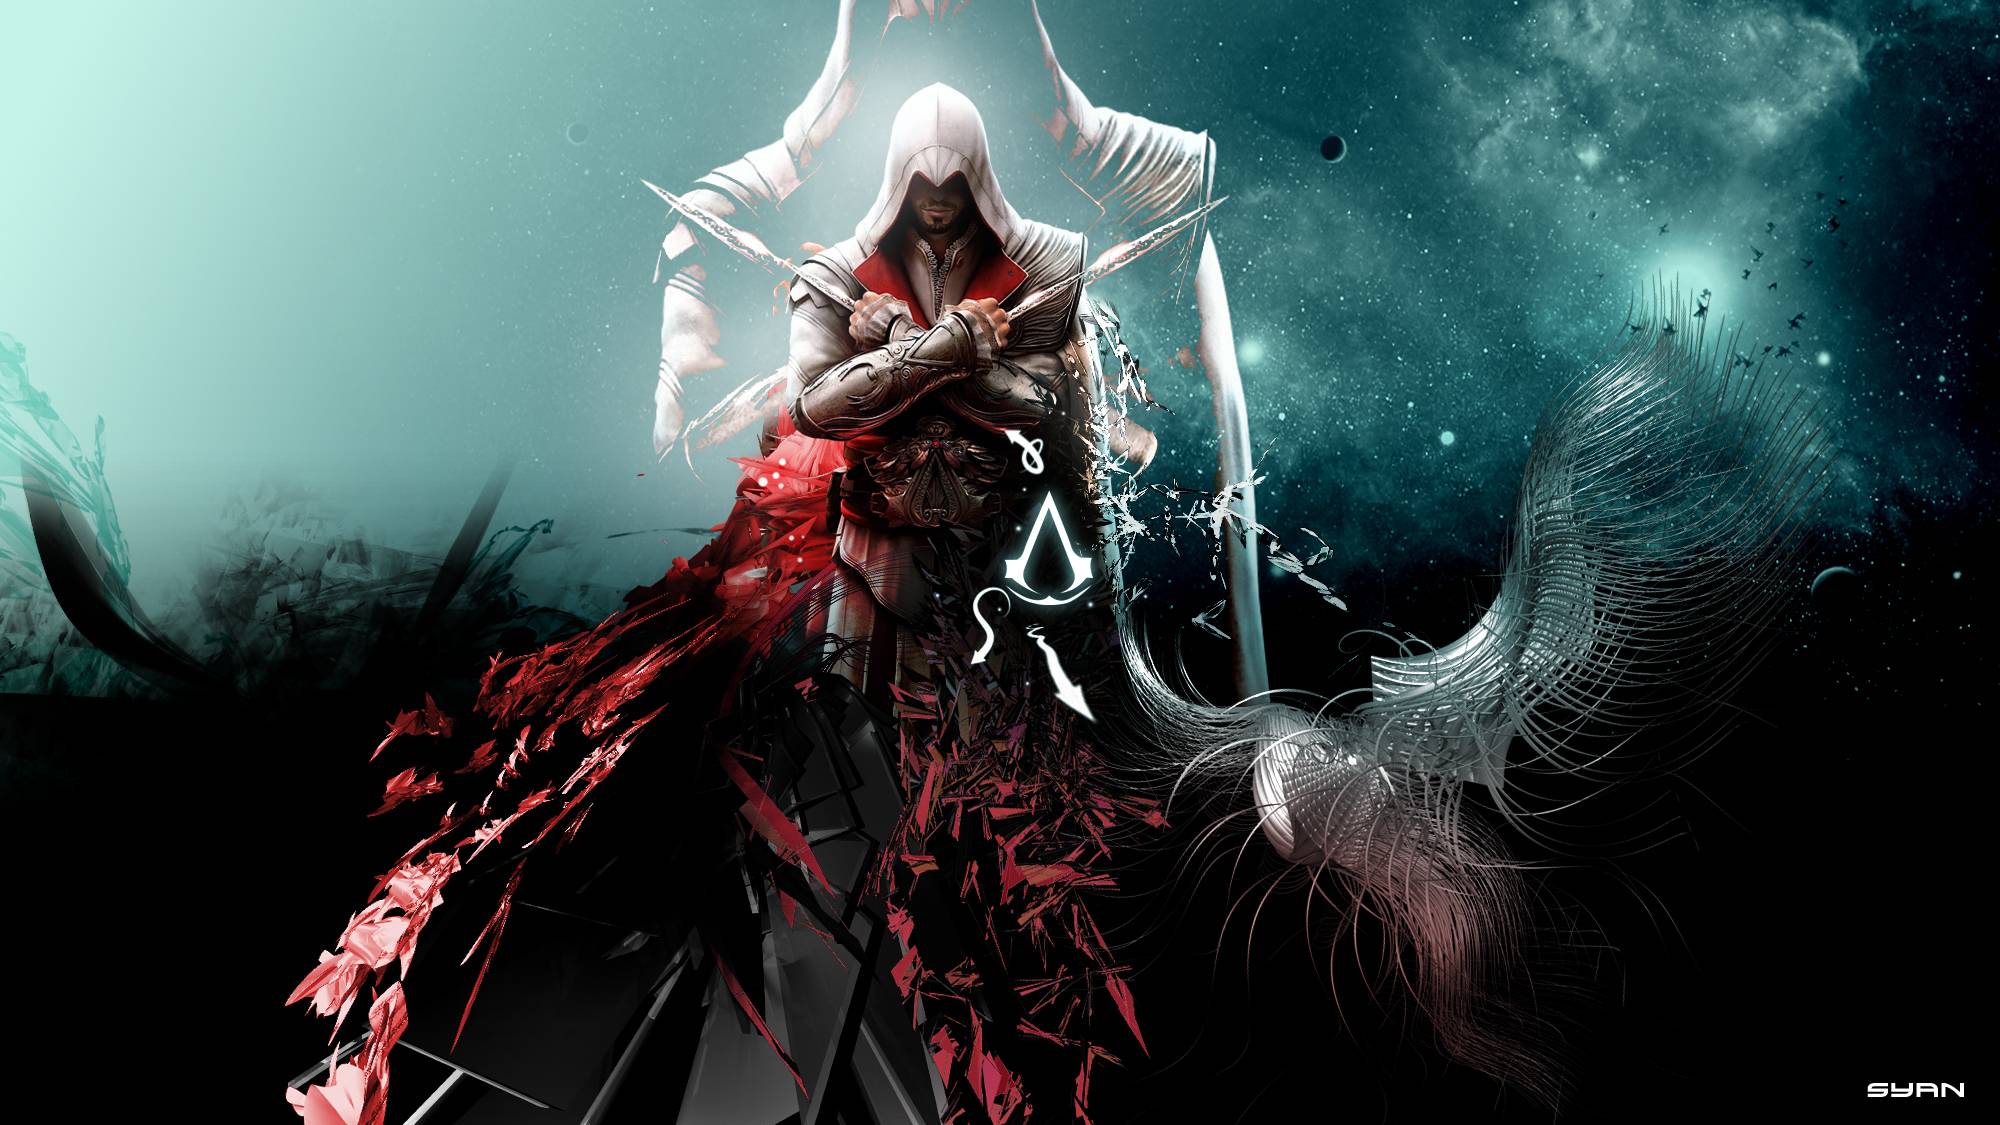 Assassin&;s Creed 3 PC Wallpaper Wallpaper. Free Game